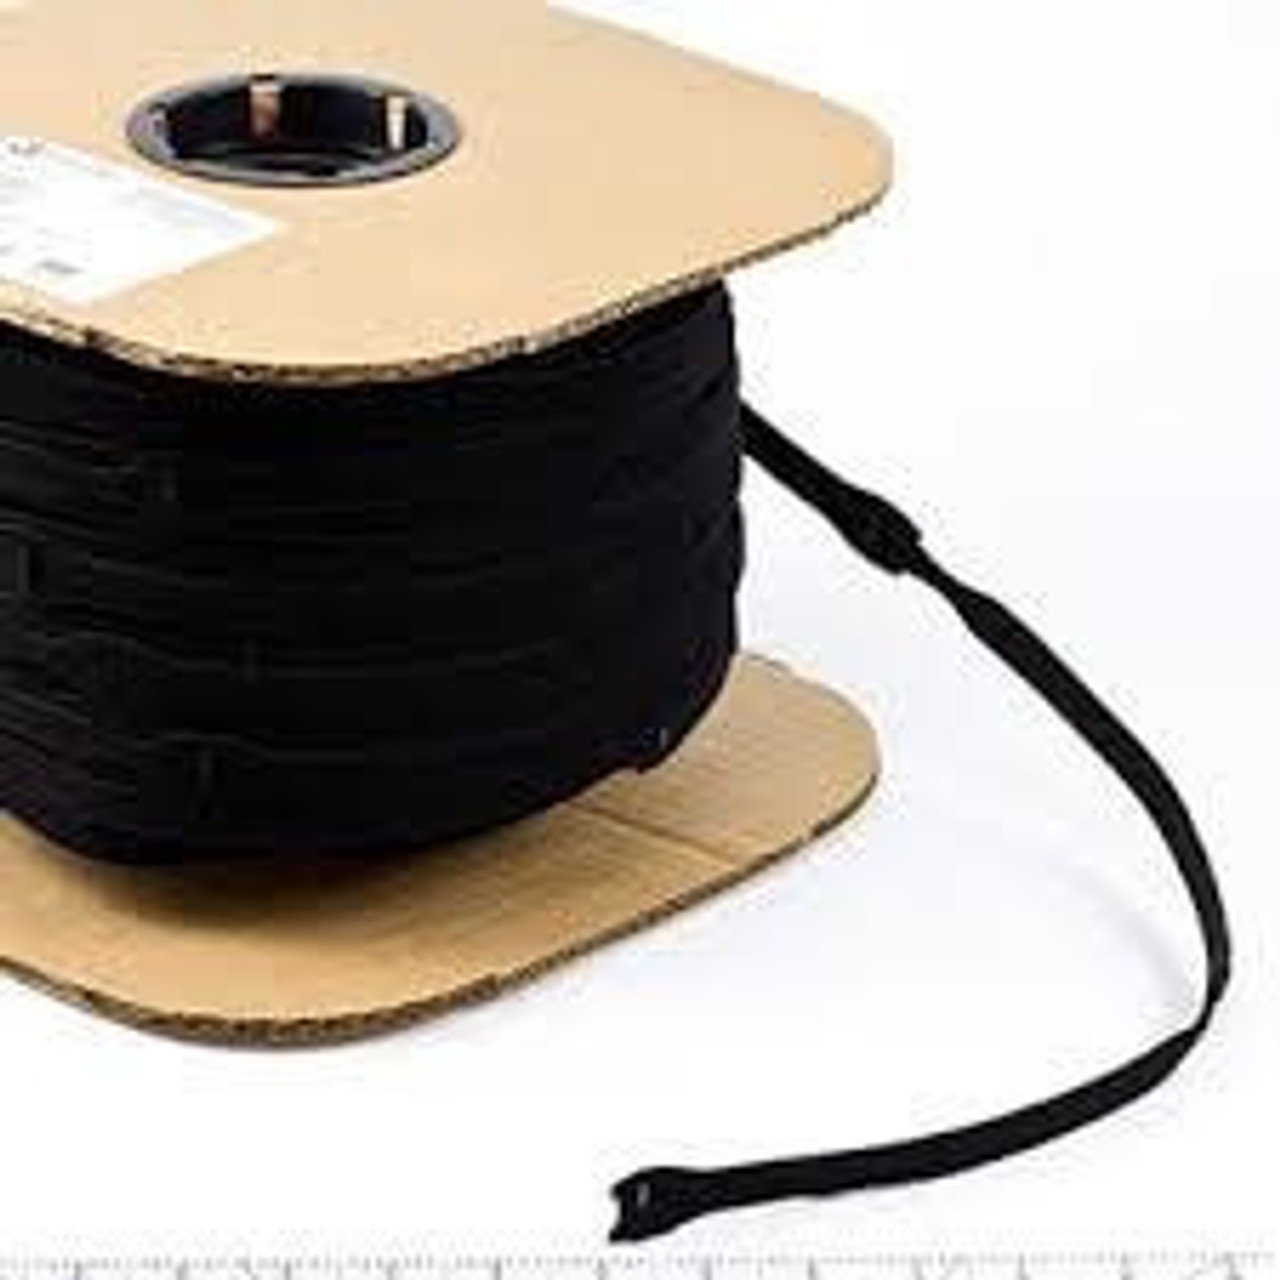 VELCRO® Brand ONE-WRAP® Tape 6 x 25 yard roll sold by Industrial